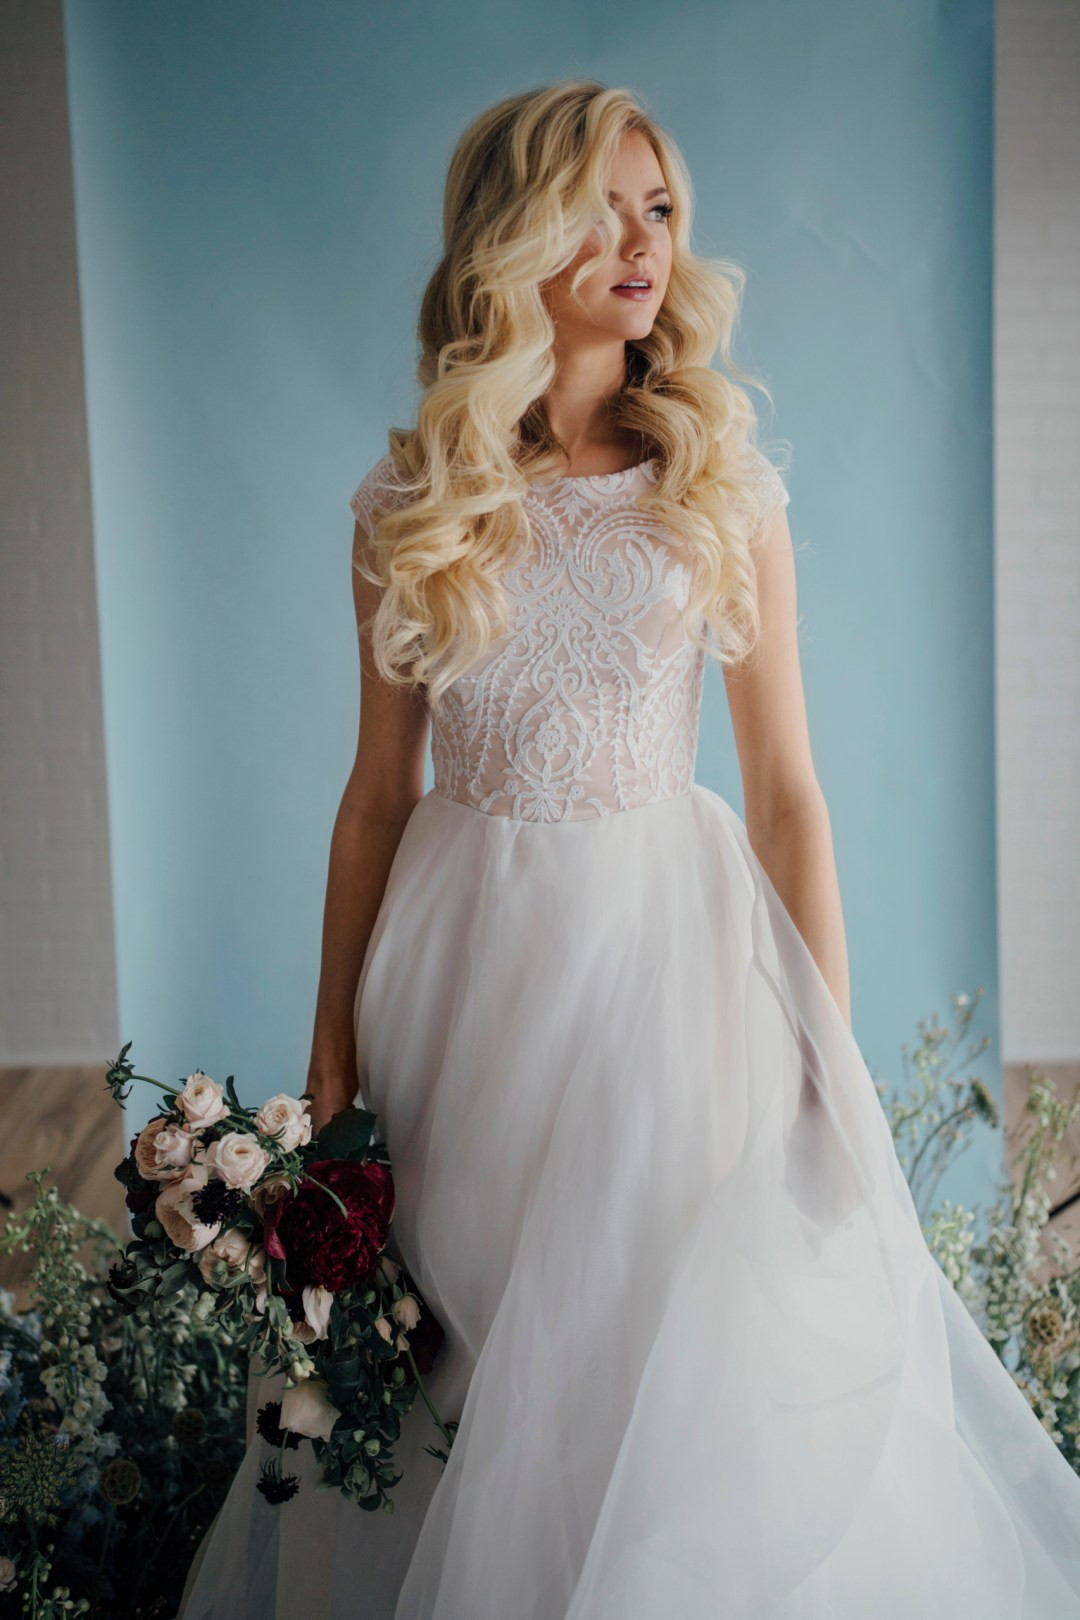 Modest Wedding Gowns With Sleeves
 25 Modest Wedding Dresses with Short Sleeves